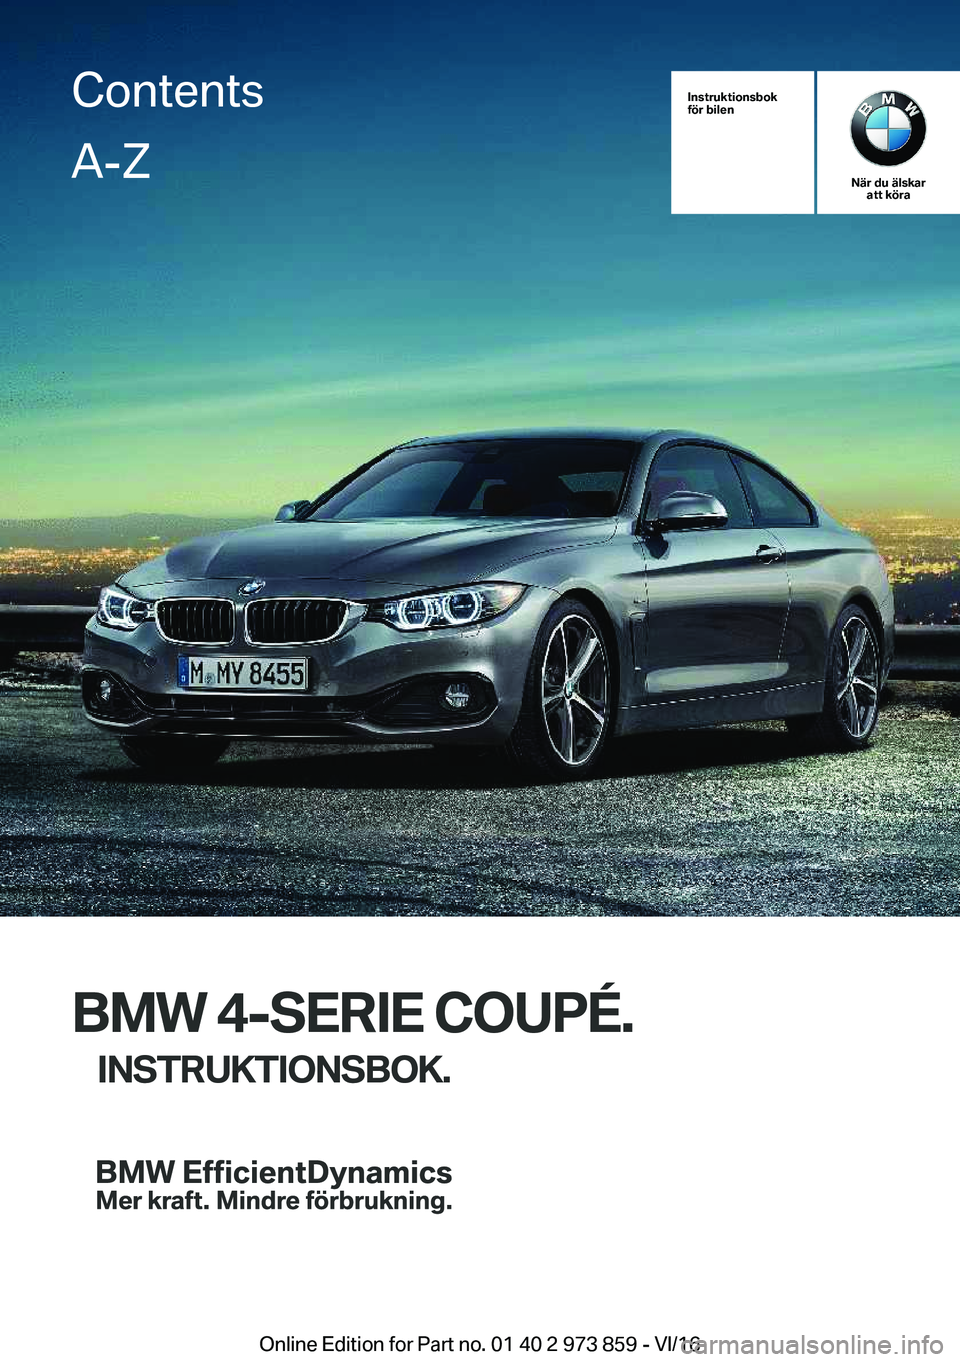 BMW 4 SERIES COUPE 2017  InstruktionsbÖcker (in Swedish) 